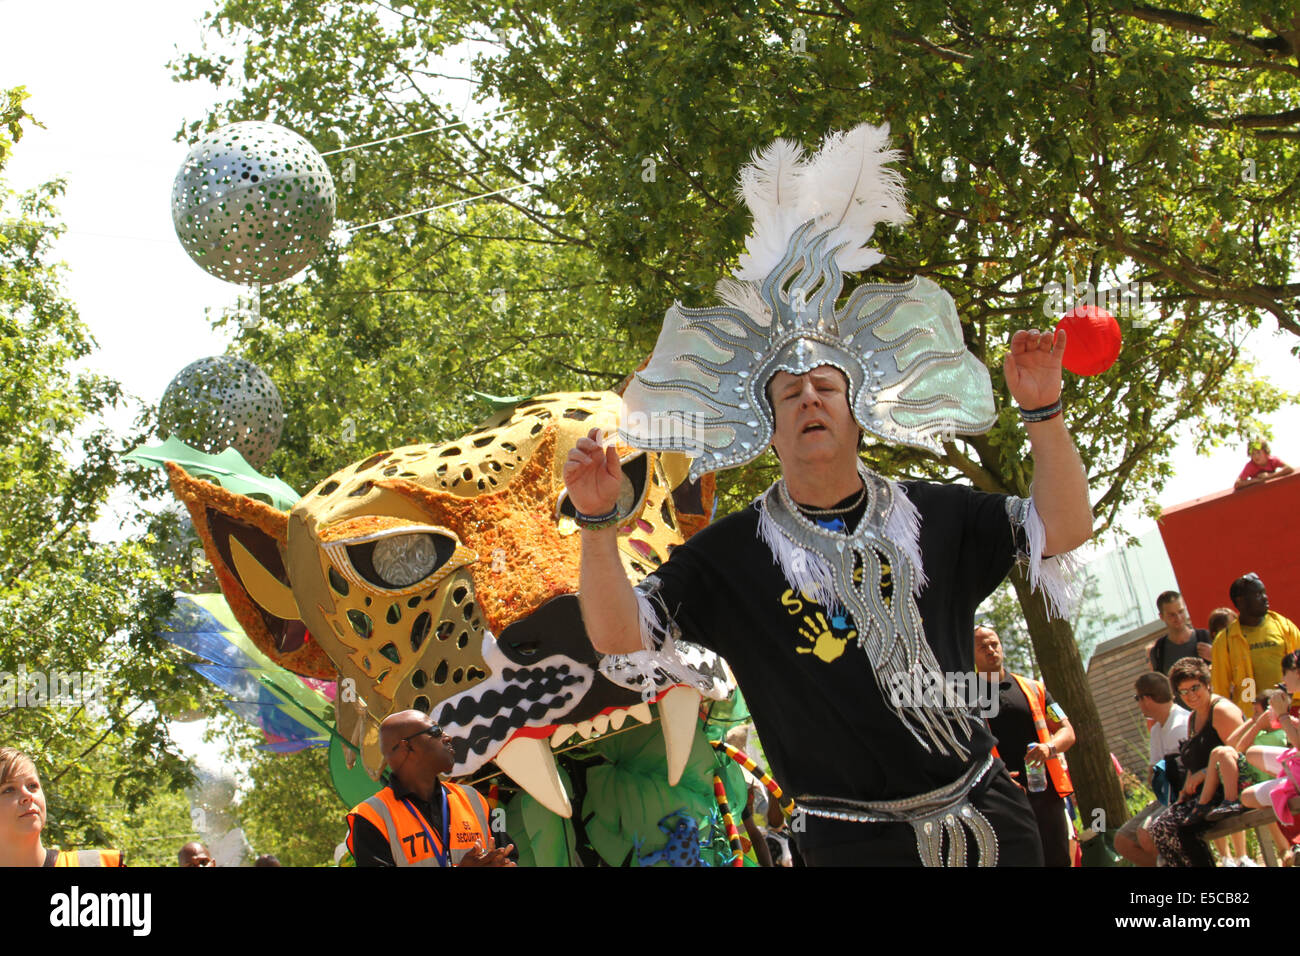 London, UK. 27 July 2014. A man from the Emegency Exit Arts dances in front of a carnival float at the Queen Elizabeth Park in Newham. Credit: David Mbiyu/ Alamy Live News Stock Photo